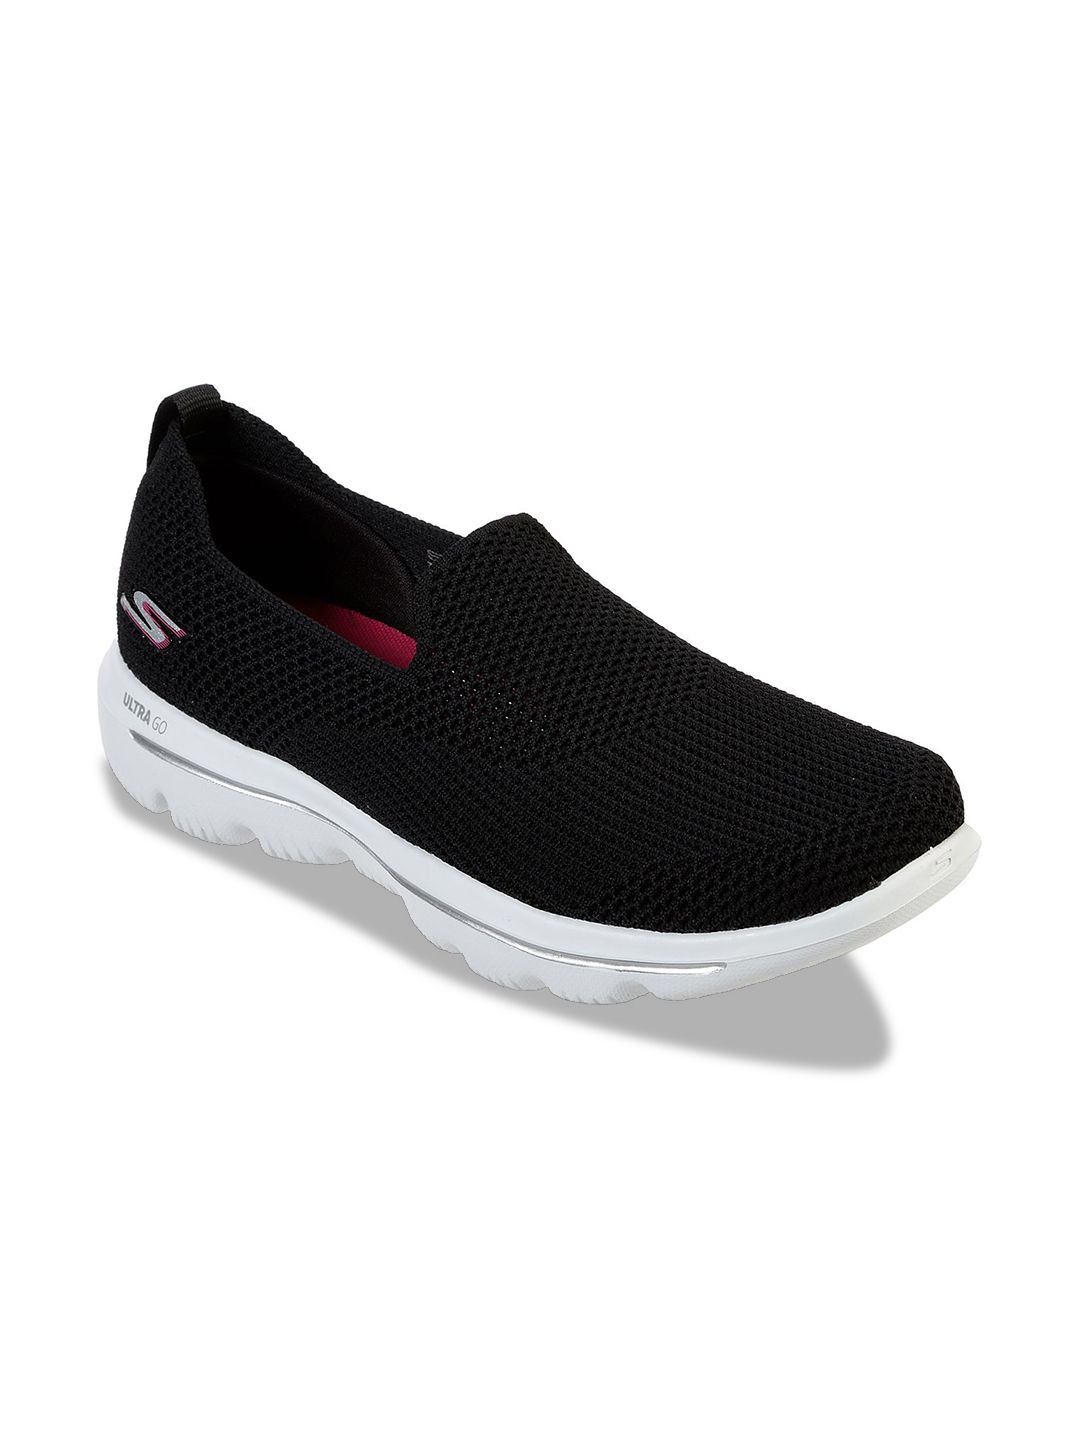 Skechers Women Black & White Evolution Ultra-Endle Walking Sports Shoes Price in India